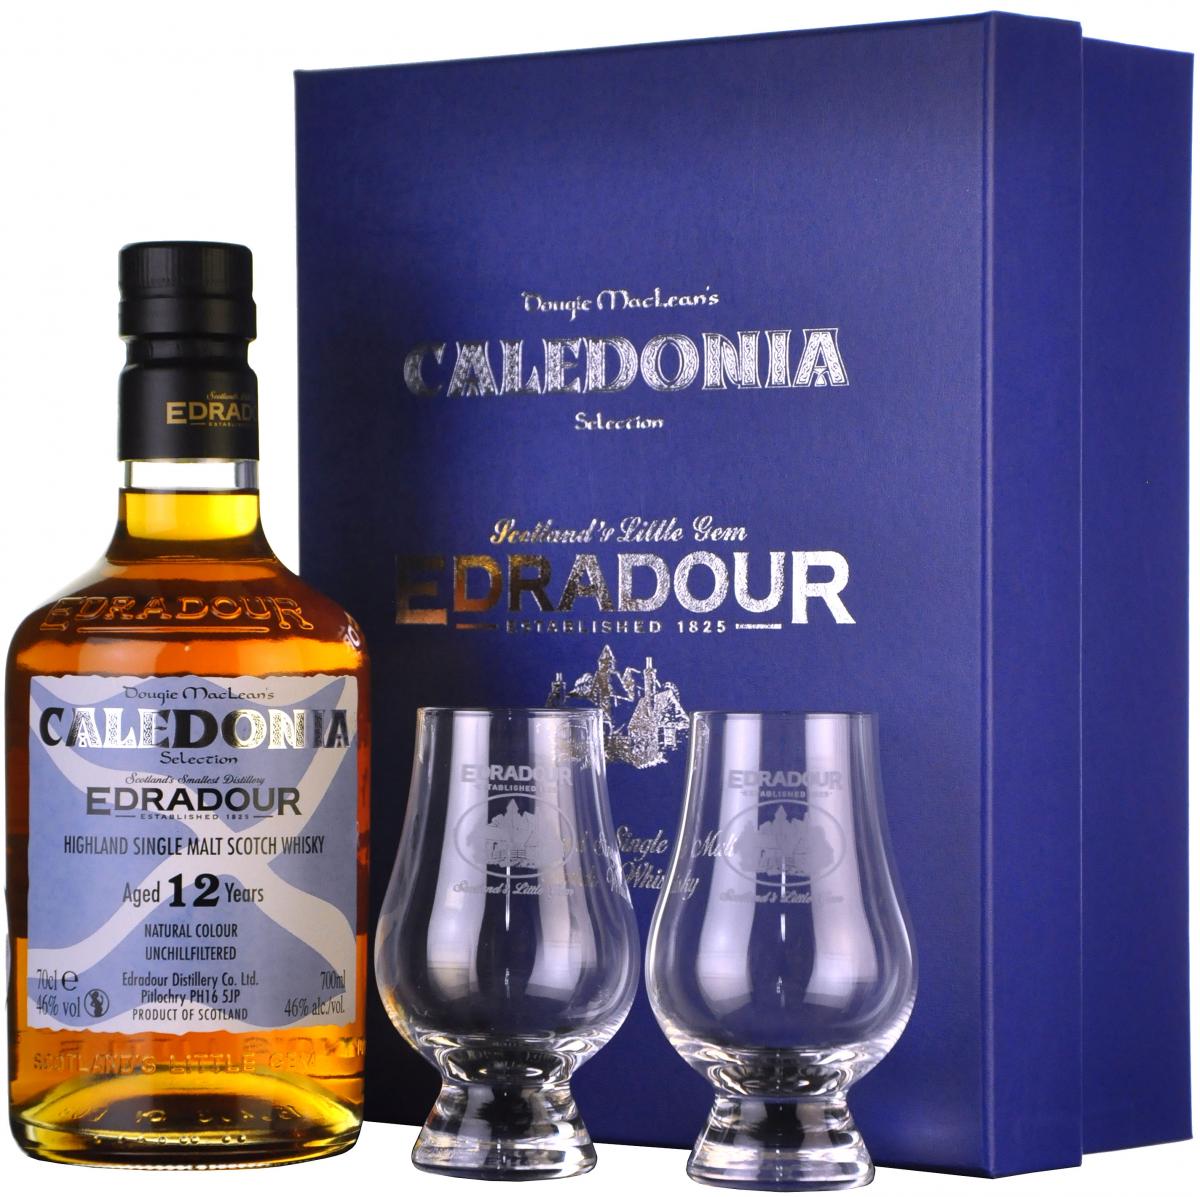 Edradour 12 Year Old Caledonia Glass Pack